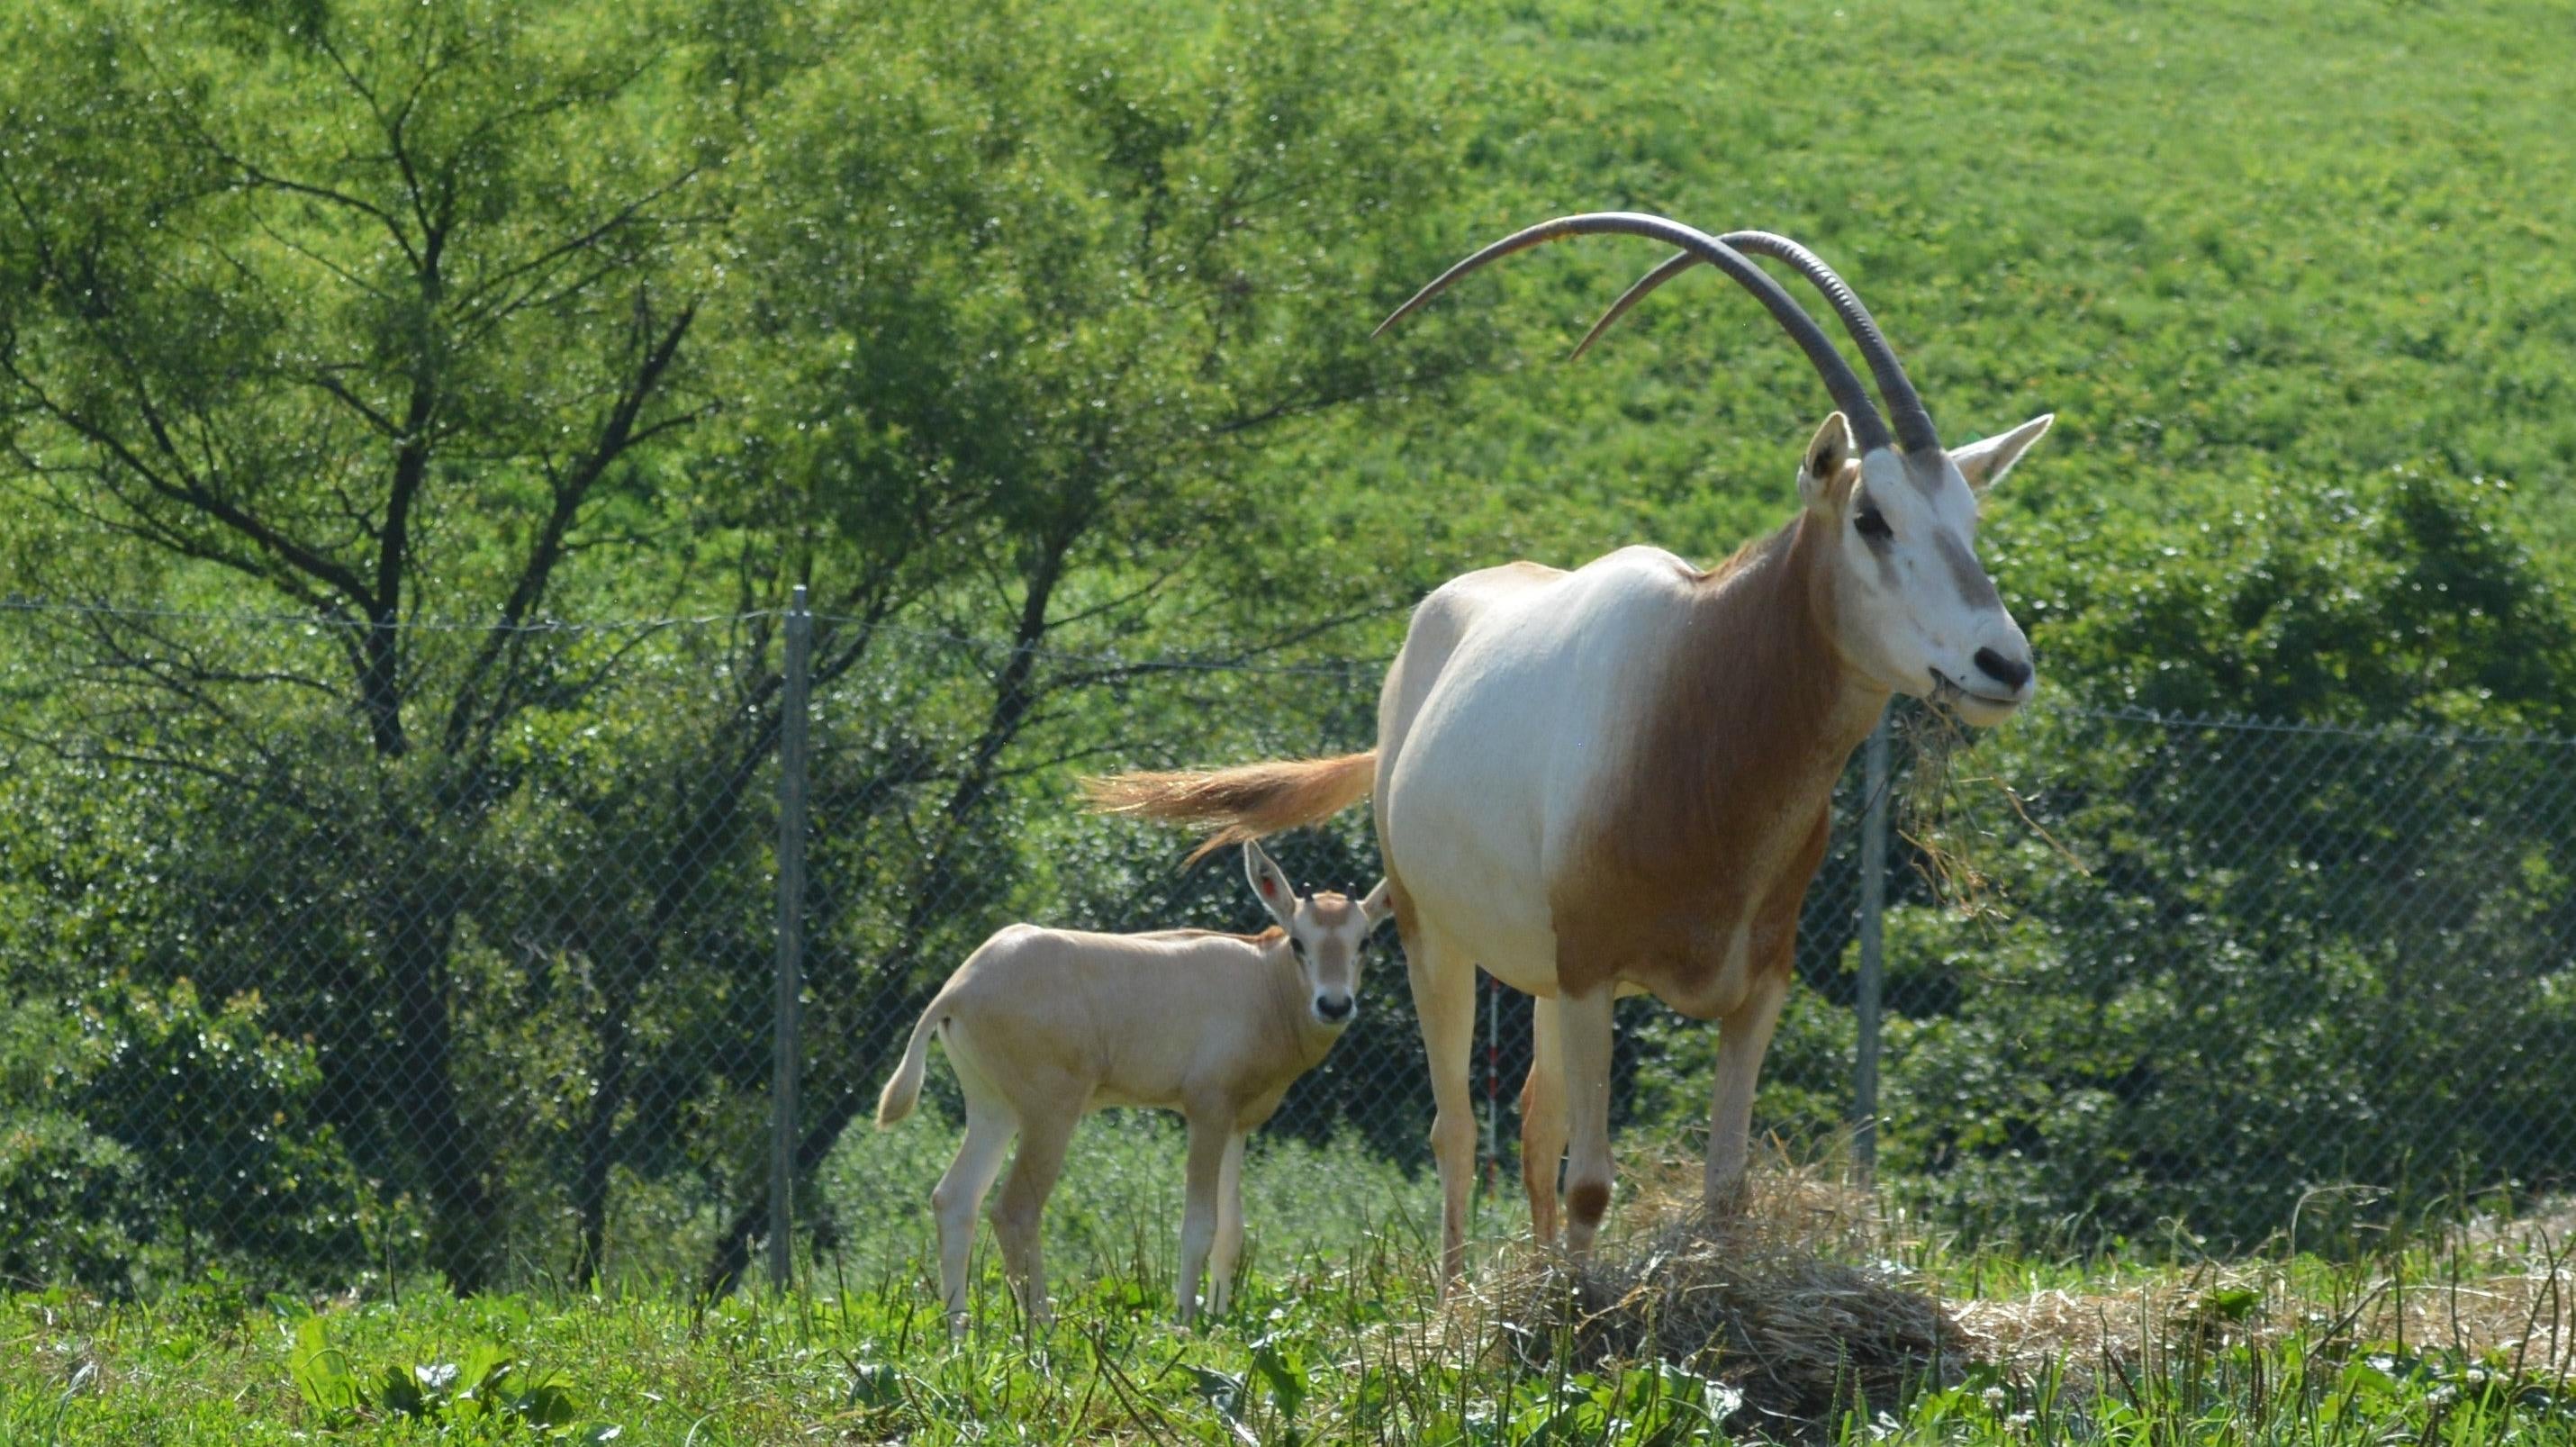 An adult oryx with a calf. (Photo: Smithsonian Institution)